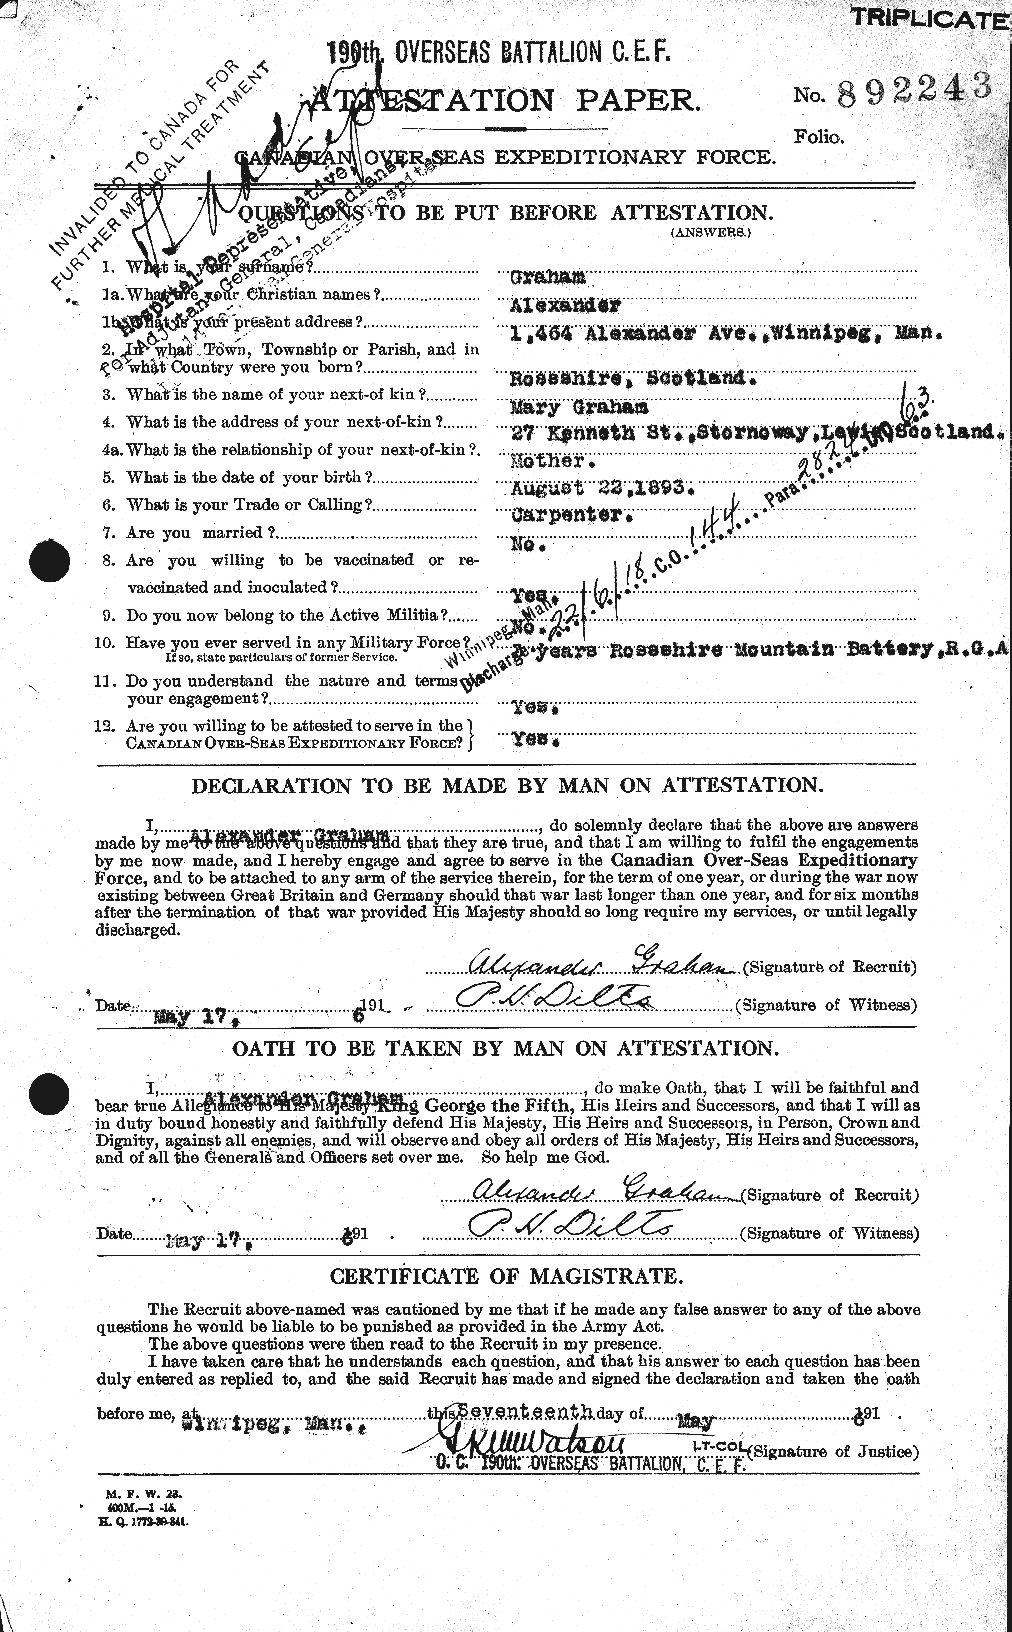 Personnel Records of the First World War - CEF 359577a